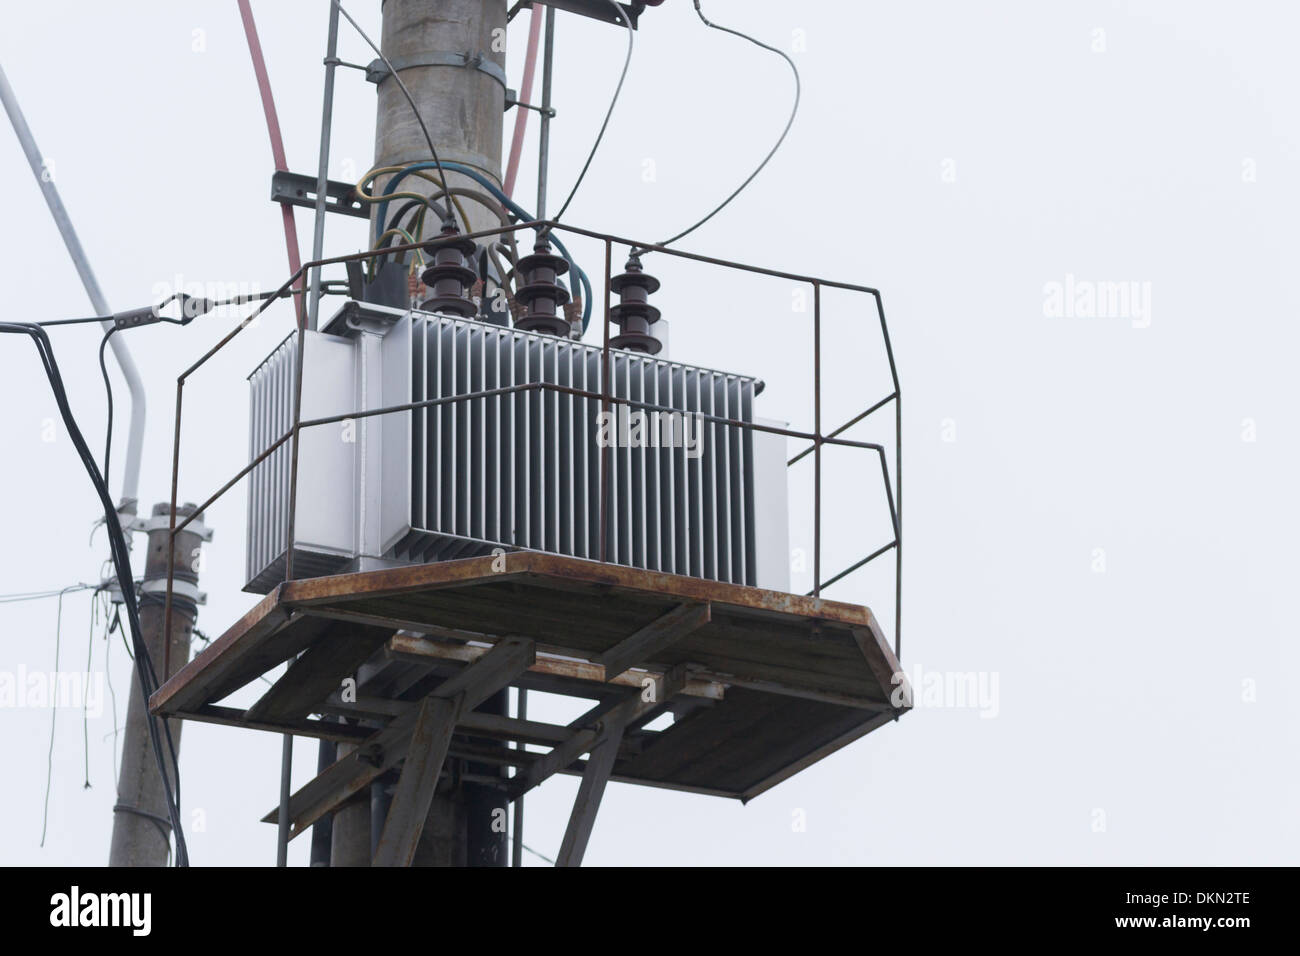 Electrical Power Transformer on an electricity pylon in winter Stock Photo